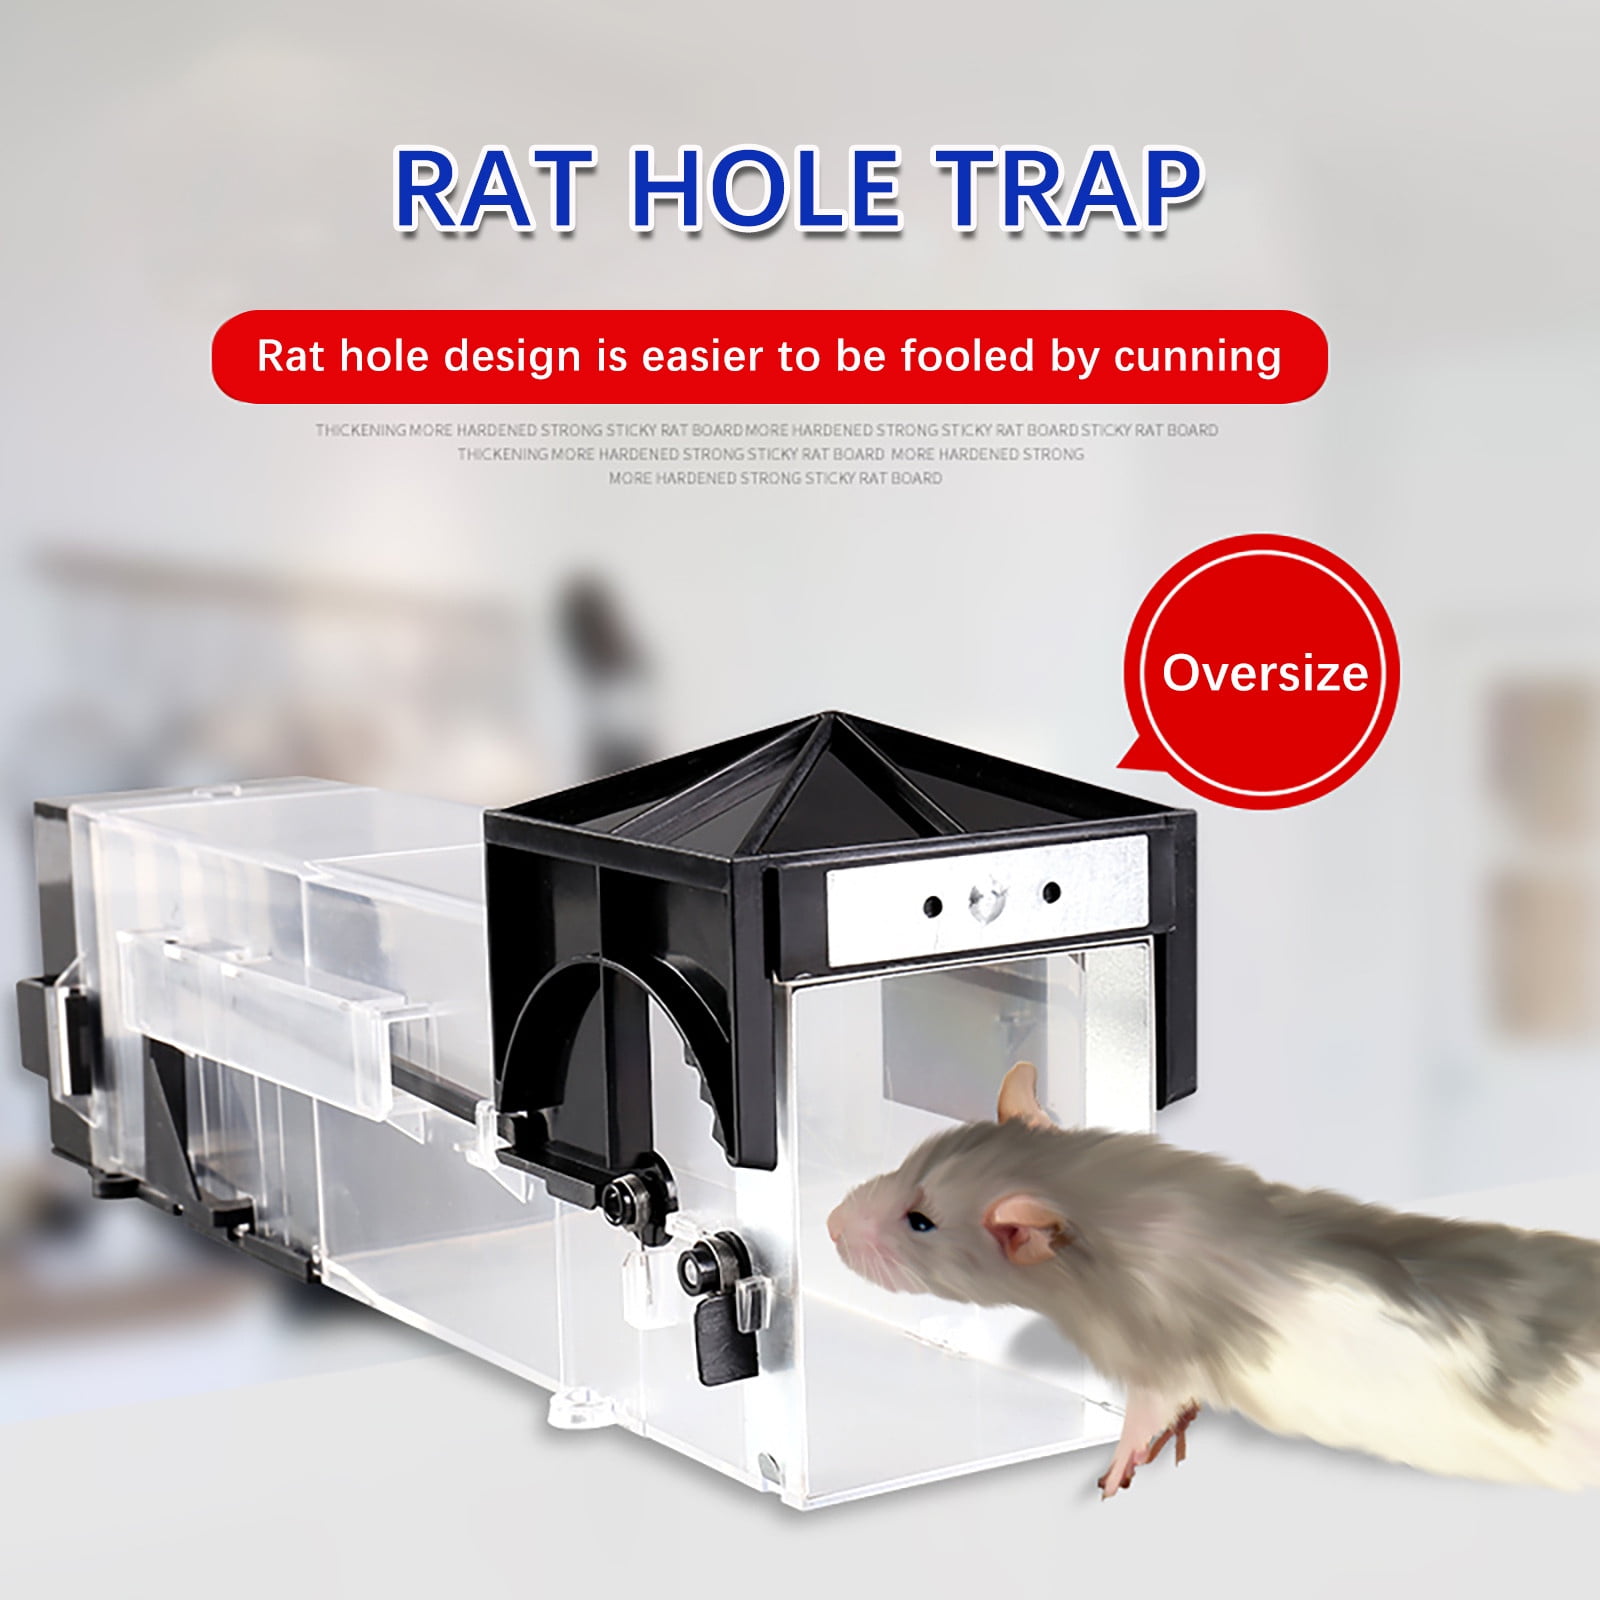 Humane Mouse Trap Smart No Kill Mouse Trap Catch and Release, Safe for  People and Pet - 6 pcs, 6 units - Kroger